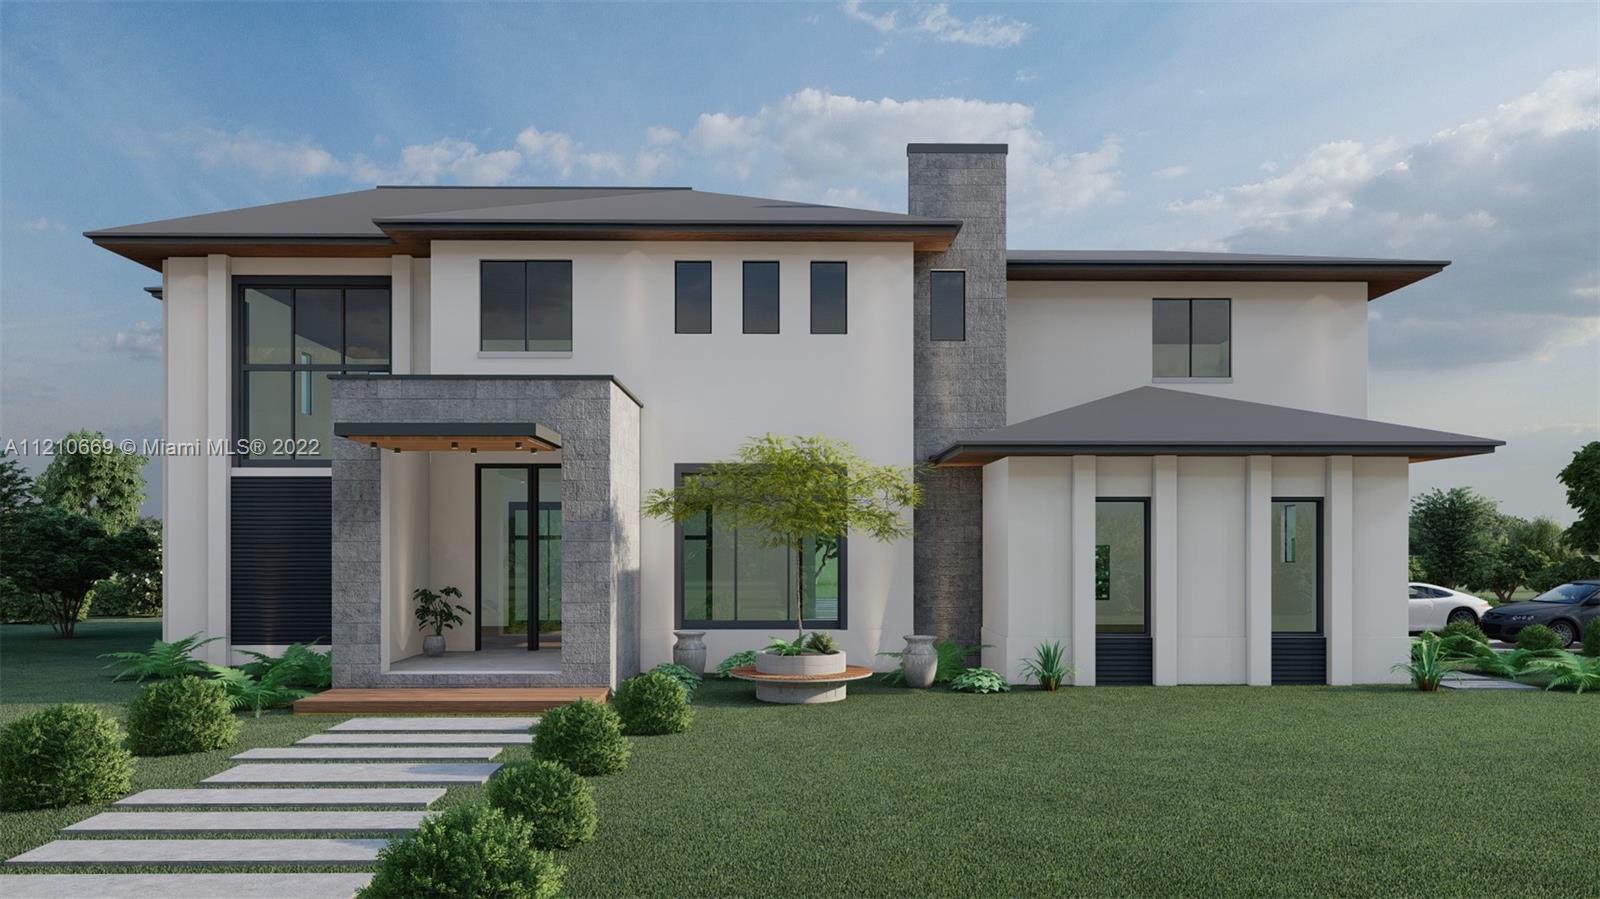 Rare pre-construction opportunity to buy a spectacular new home in the highly sought after Coral Gables neighborhood known as the Platinum Triangle. November 2022 start date & expected completion Spring 2024.  To be built on a 10,043 SF lot near the Cocoplum Circle, which connects the scenic & tree-canopied roadways of Ingraham Highway, Sunset Drive & Old Cutler Road.  Pacheco Architecture has designed this 5618 SF home that features: 6BR’s/6.5BA’s, Subzero & Wolf appliances, porcelain tile flooring, 2 car garage & pool. Close to all of the best that Miami has to offer: world-class dining & shopping in Coral Gables, Coconut Grove & South Miami and to highly acclaimed schools.